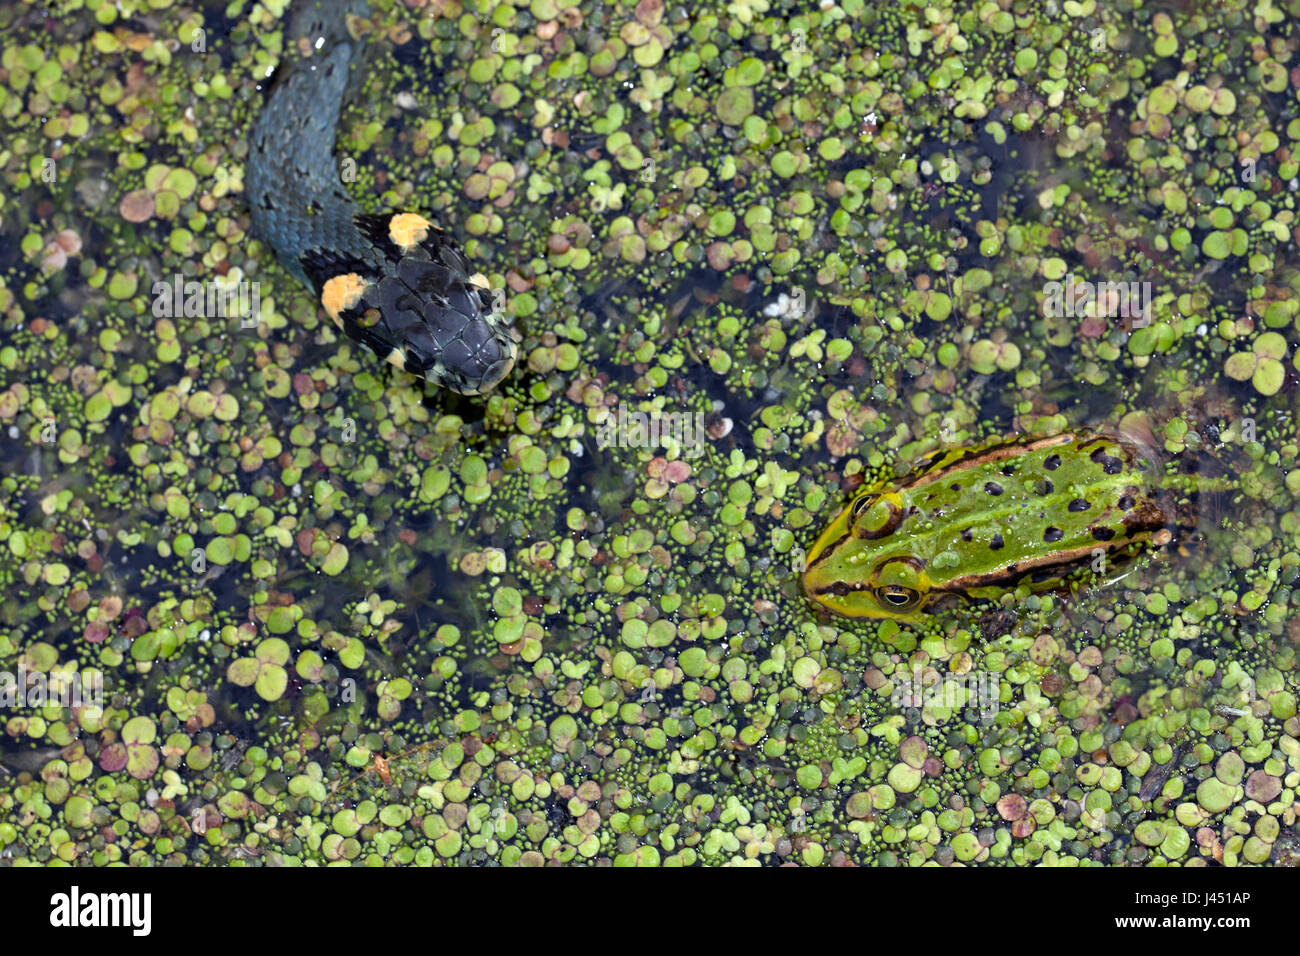 grass snake hunting green frog in duckweed Stock Photo